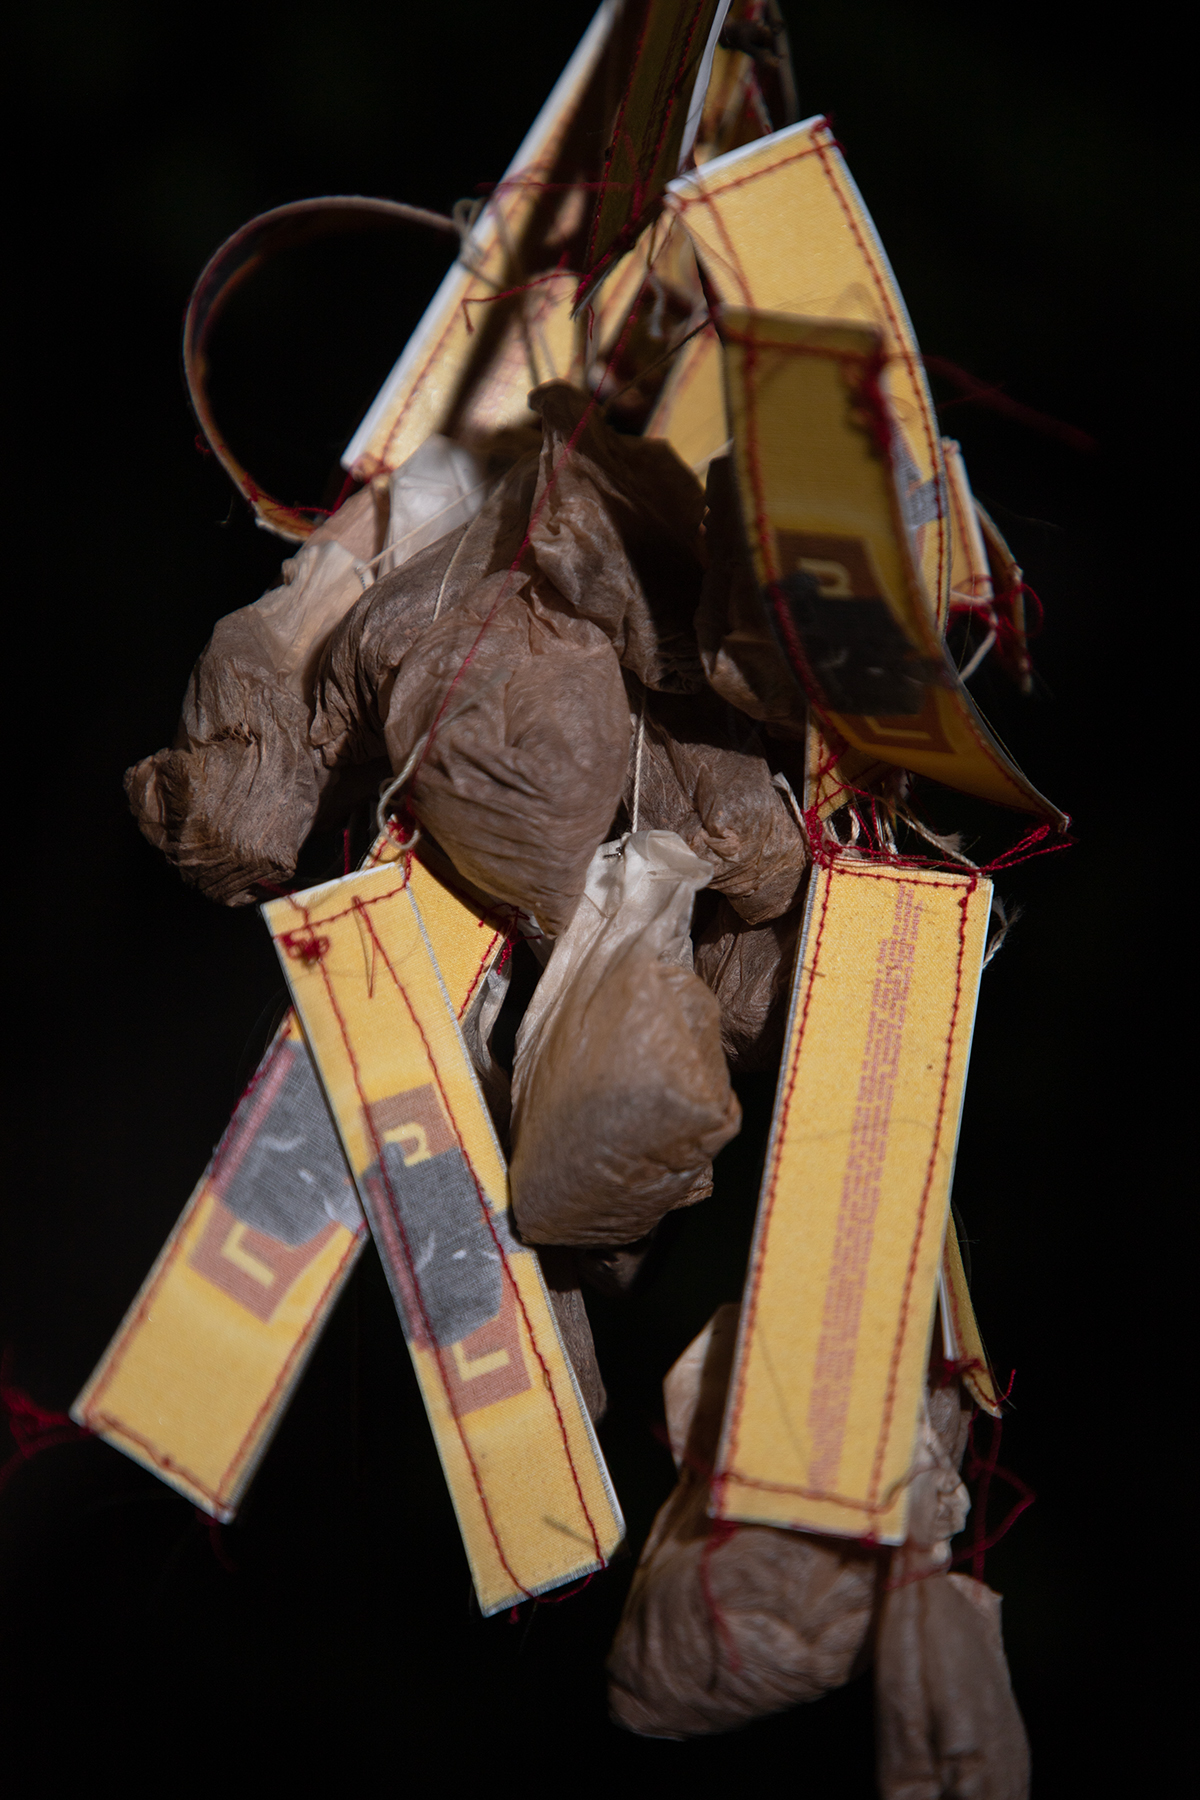 A close-up of used Lipton tea bags are suspended in mid-air. The tea bags have yellow labels with red stitching on the front and back. There is an image of Sir Thomas Lipton on the front. 